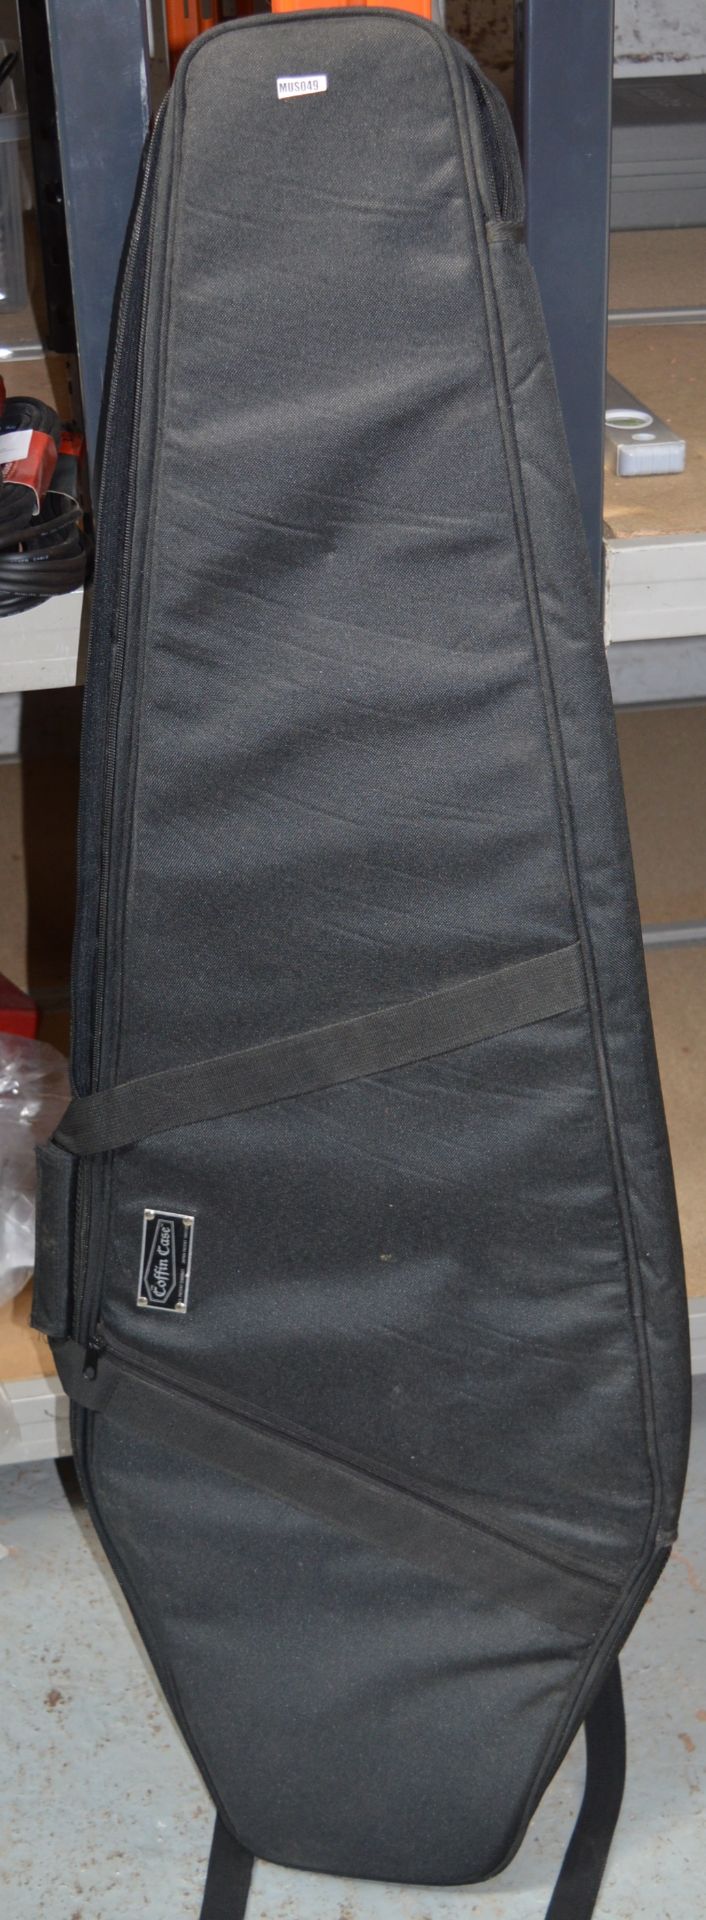 1 x Coffin Case Electric Guitar Gig Bag - Ideal For Use With Teles or Strats - Velvet Interior - Image 2 of 4